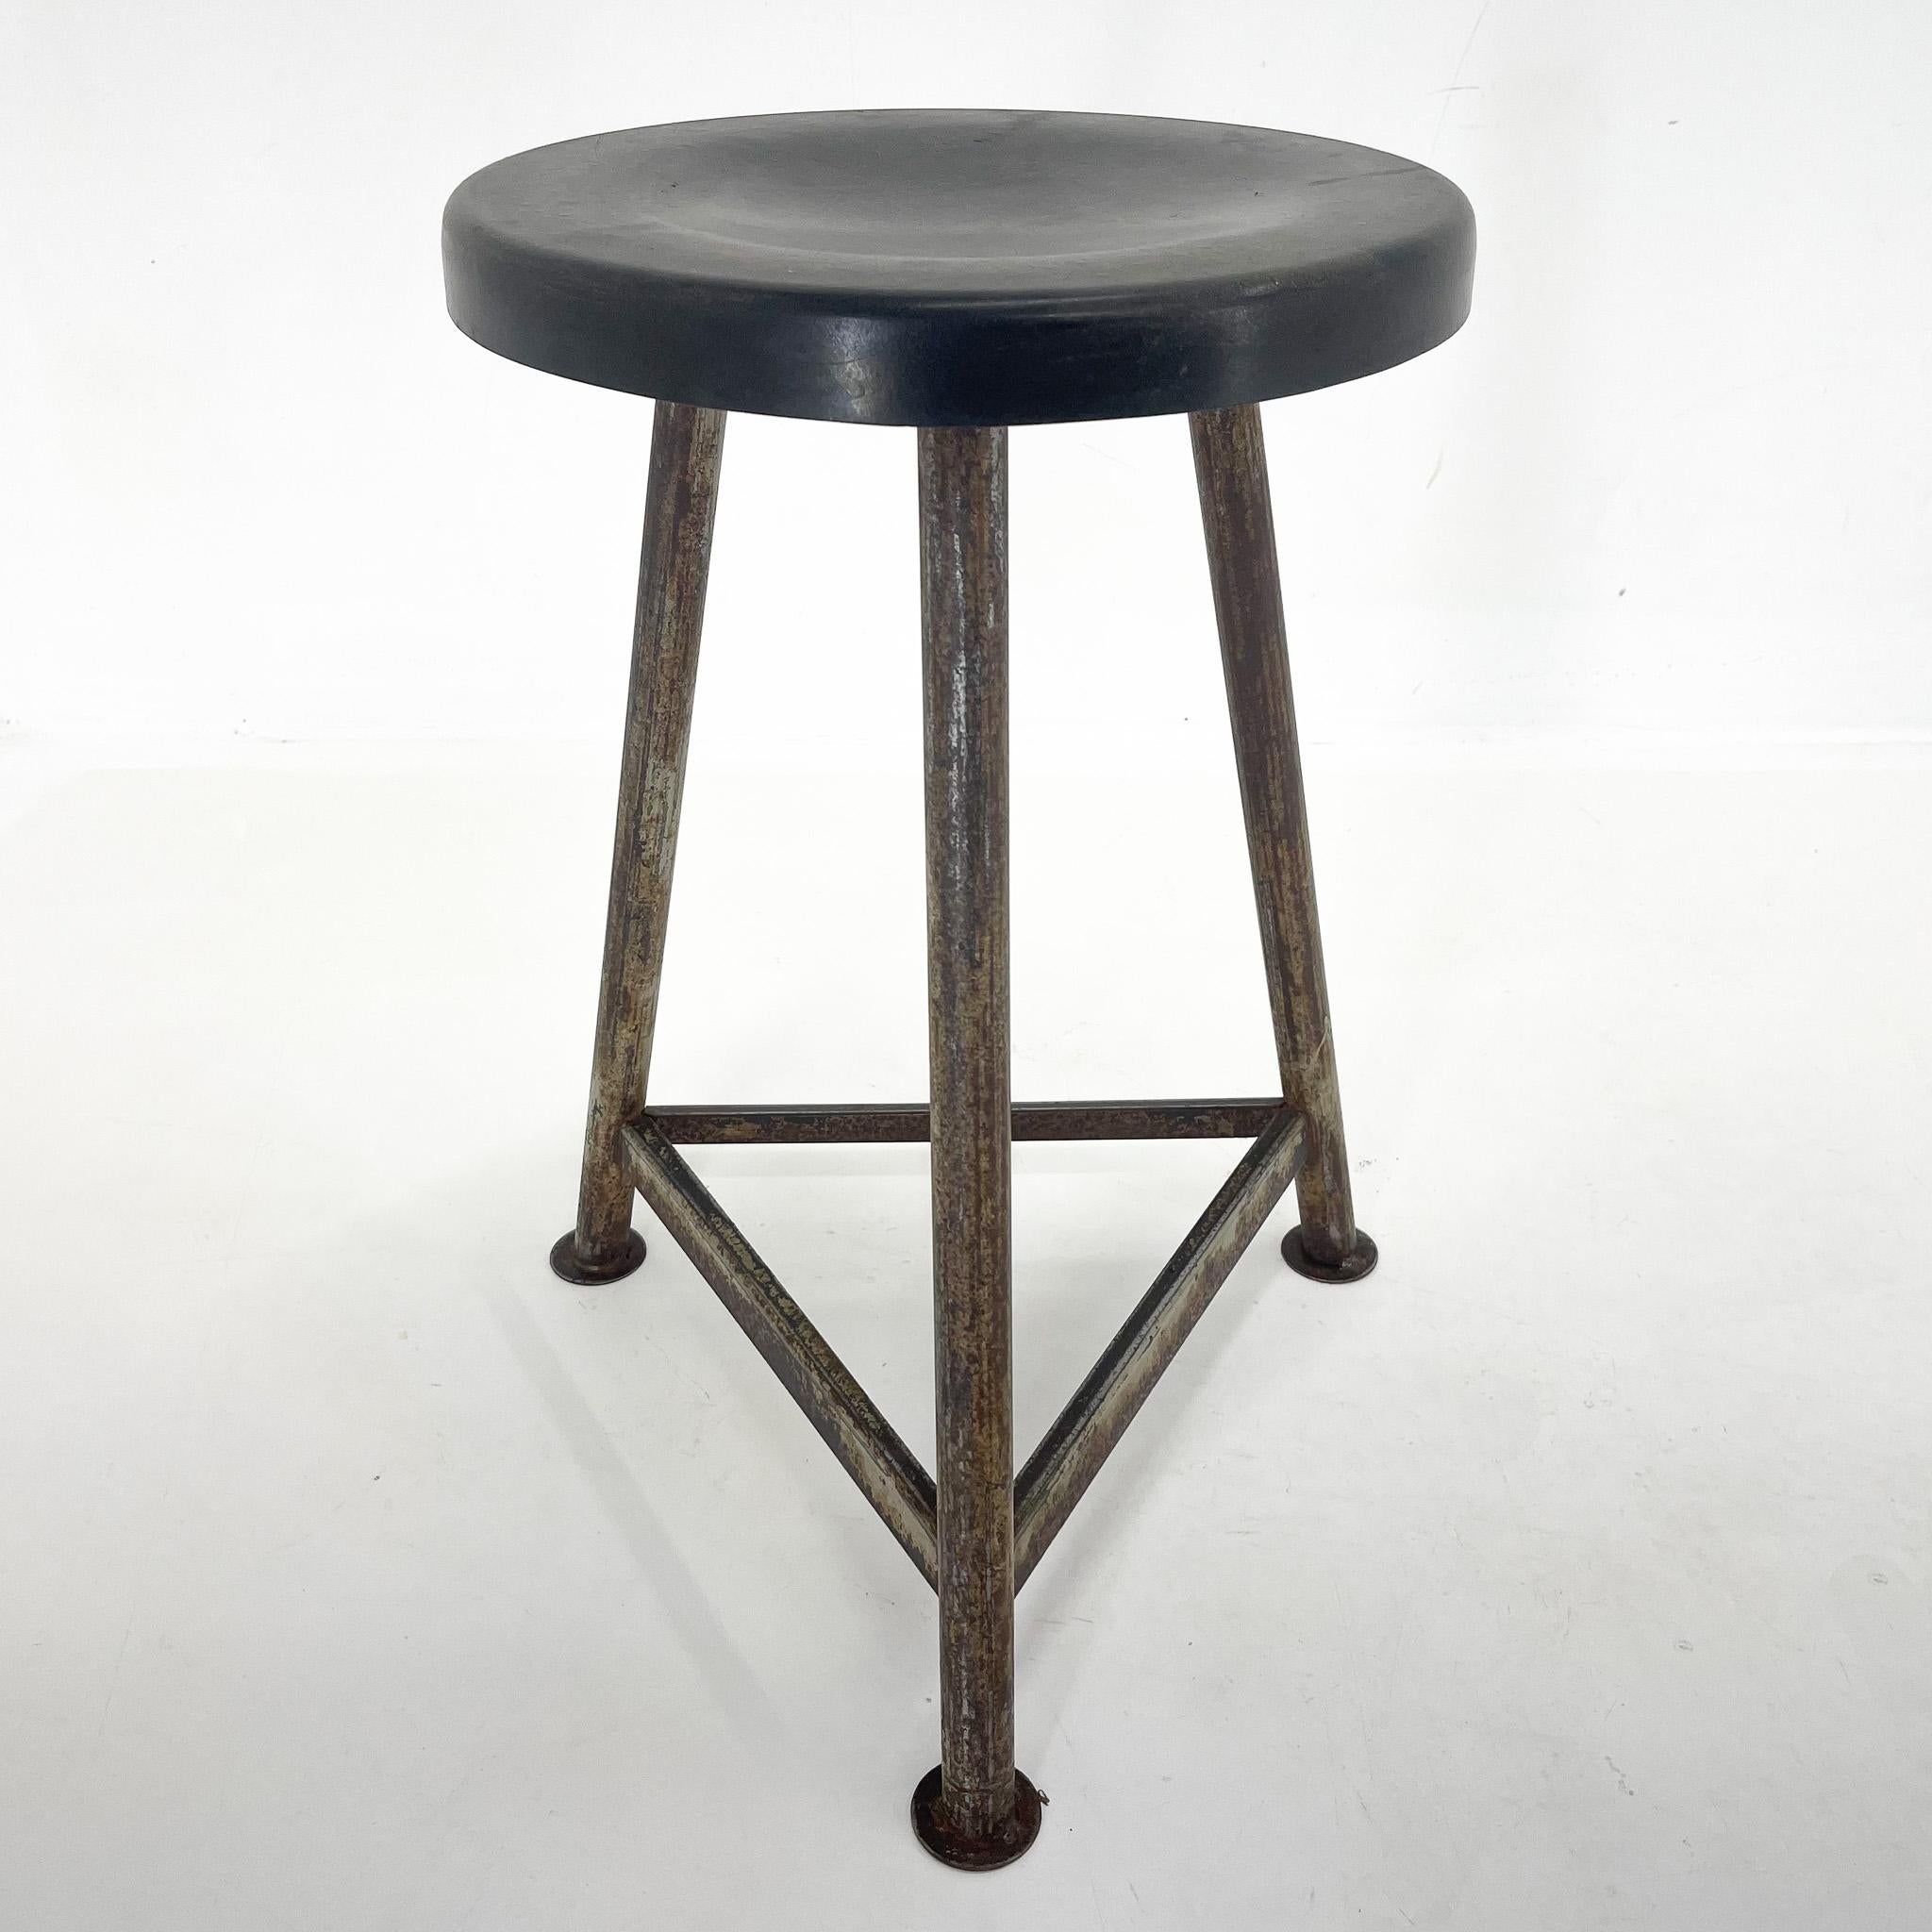 Vintage industrial tripod stool, made of iron and plastic. Saved from a factory in former Czechoslovakia. Thouroughly cleaned. The diameter of the seat is 37 cm. The widest point at the bottom of the legs is 47 cm.